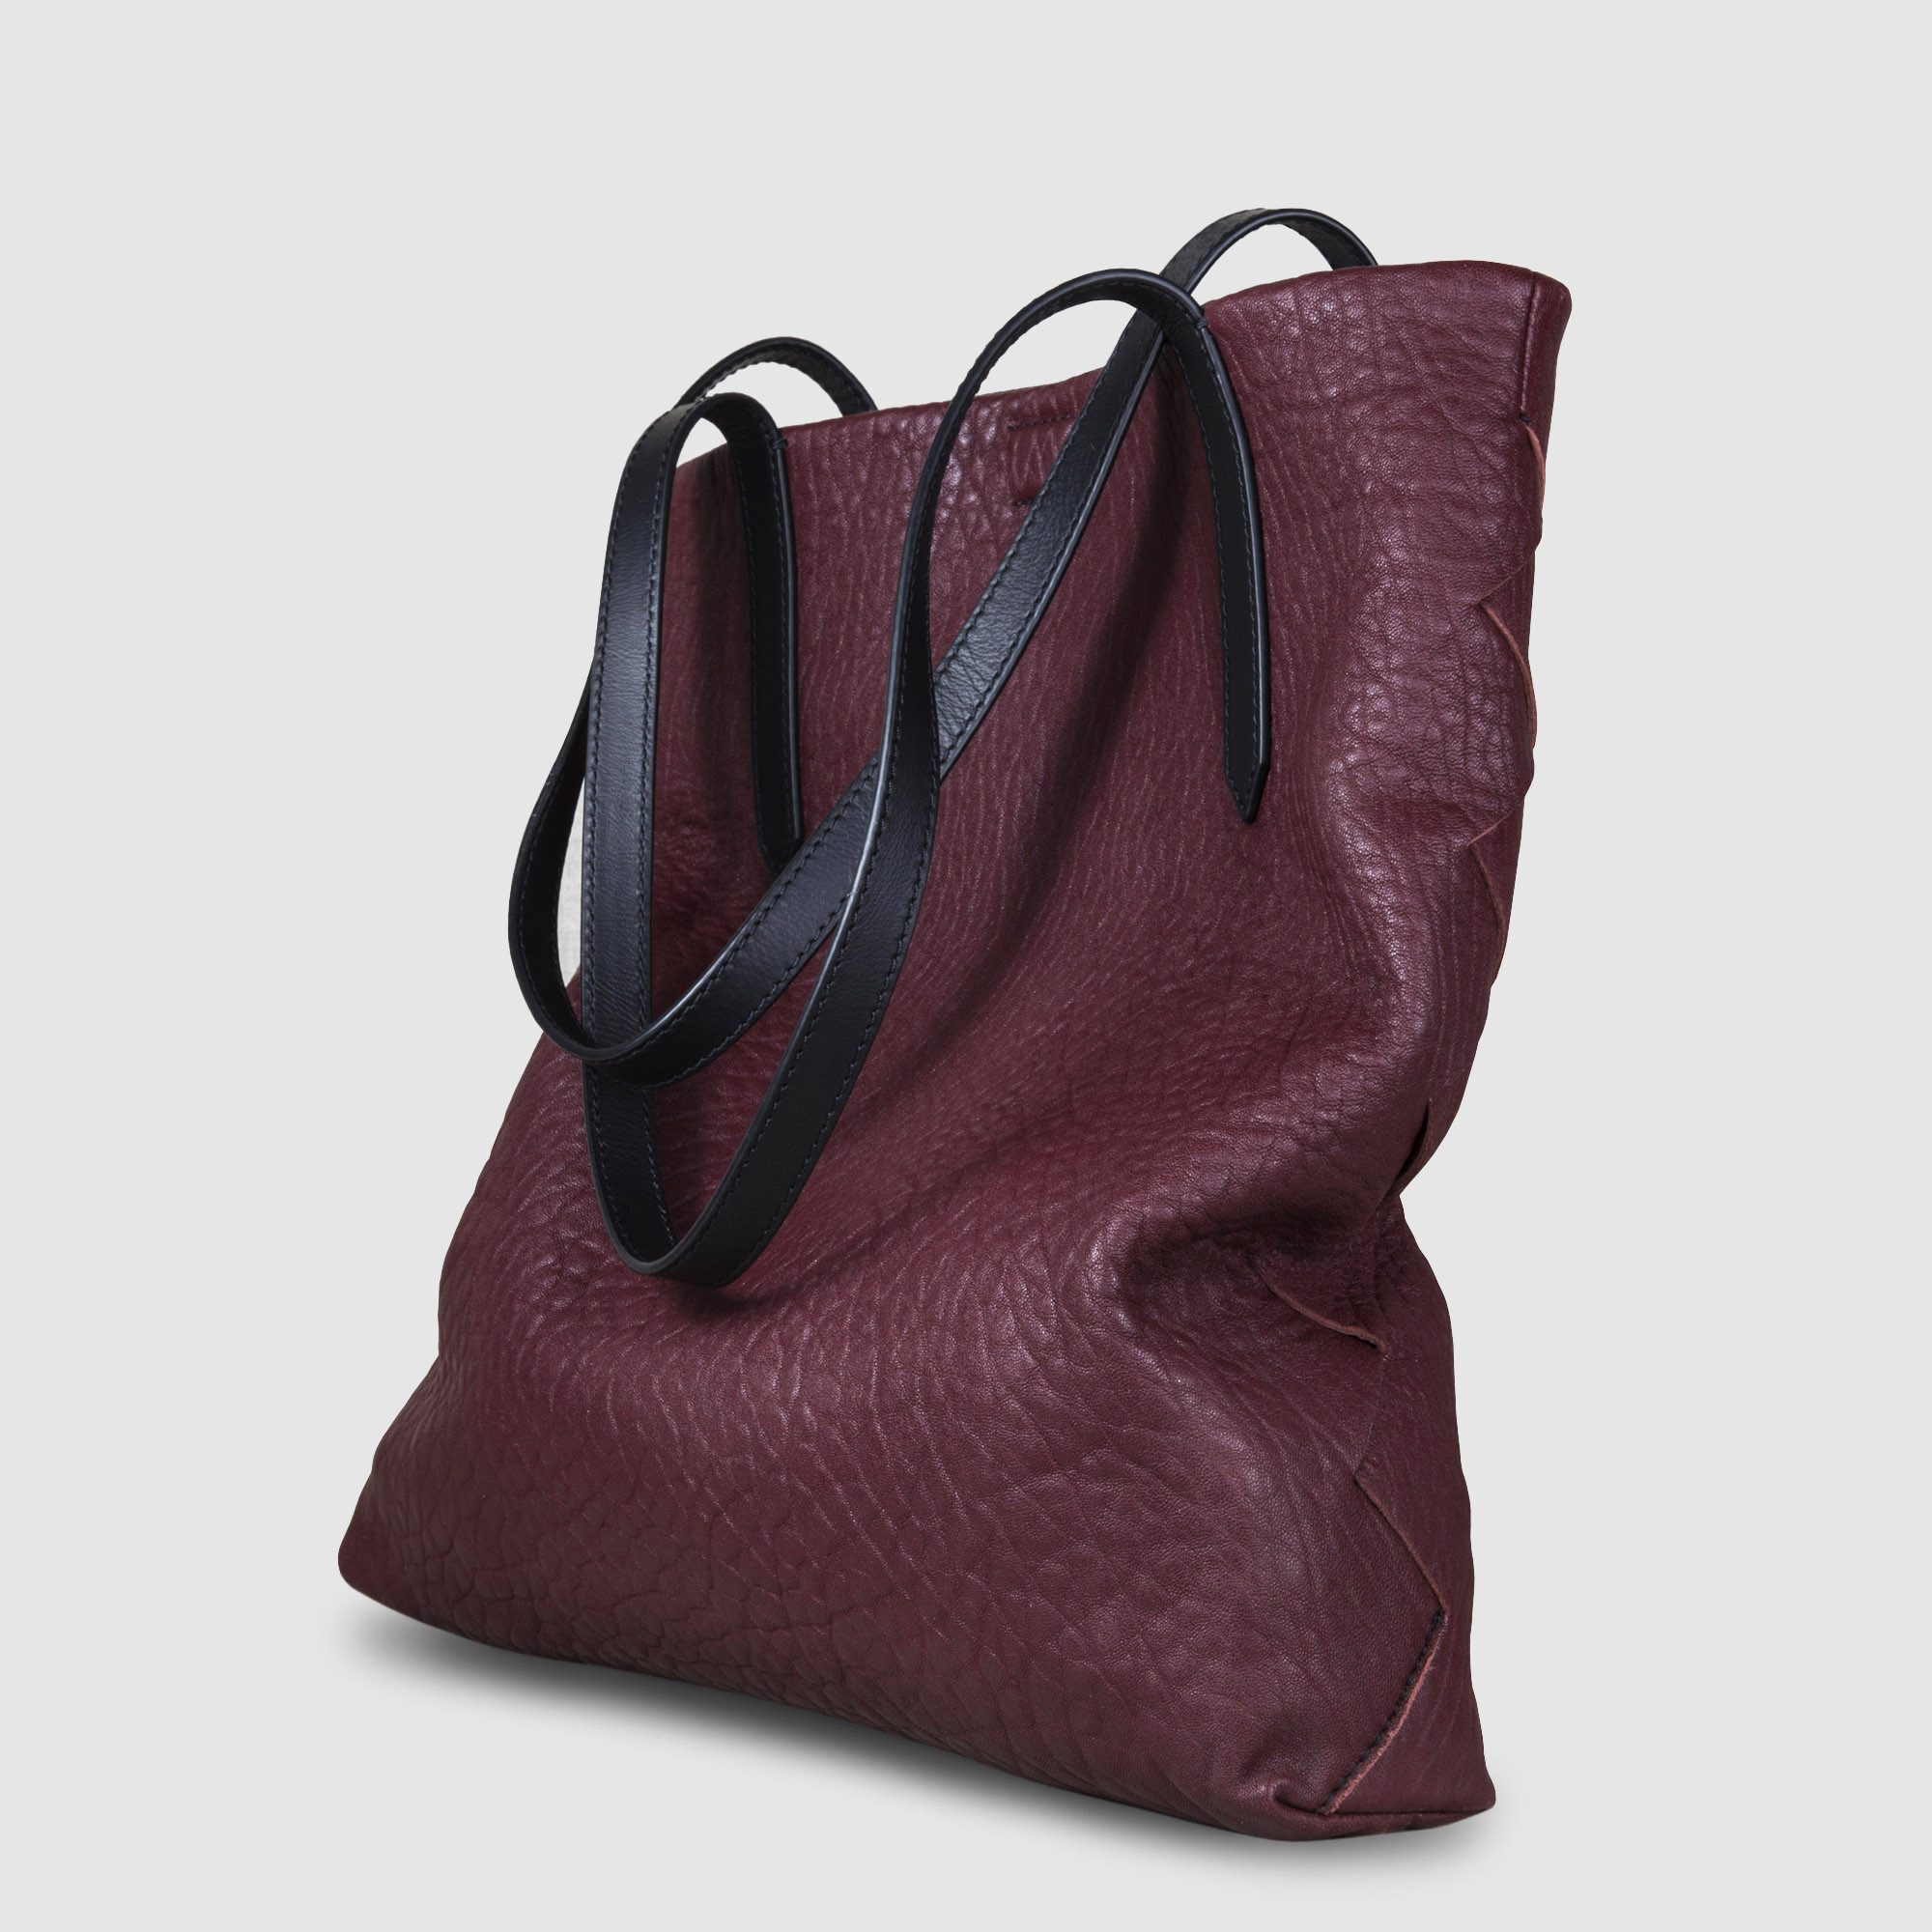 Soft lamb leather shopper "SUZANNE", big size, burgundy color - side view on grey background